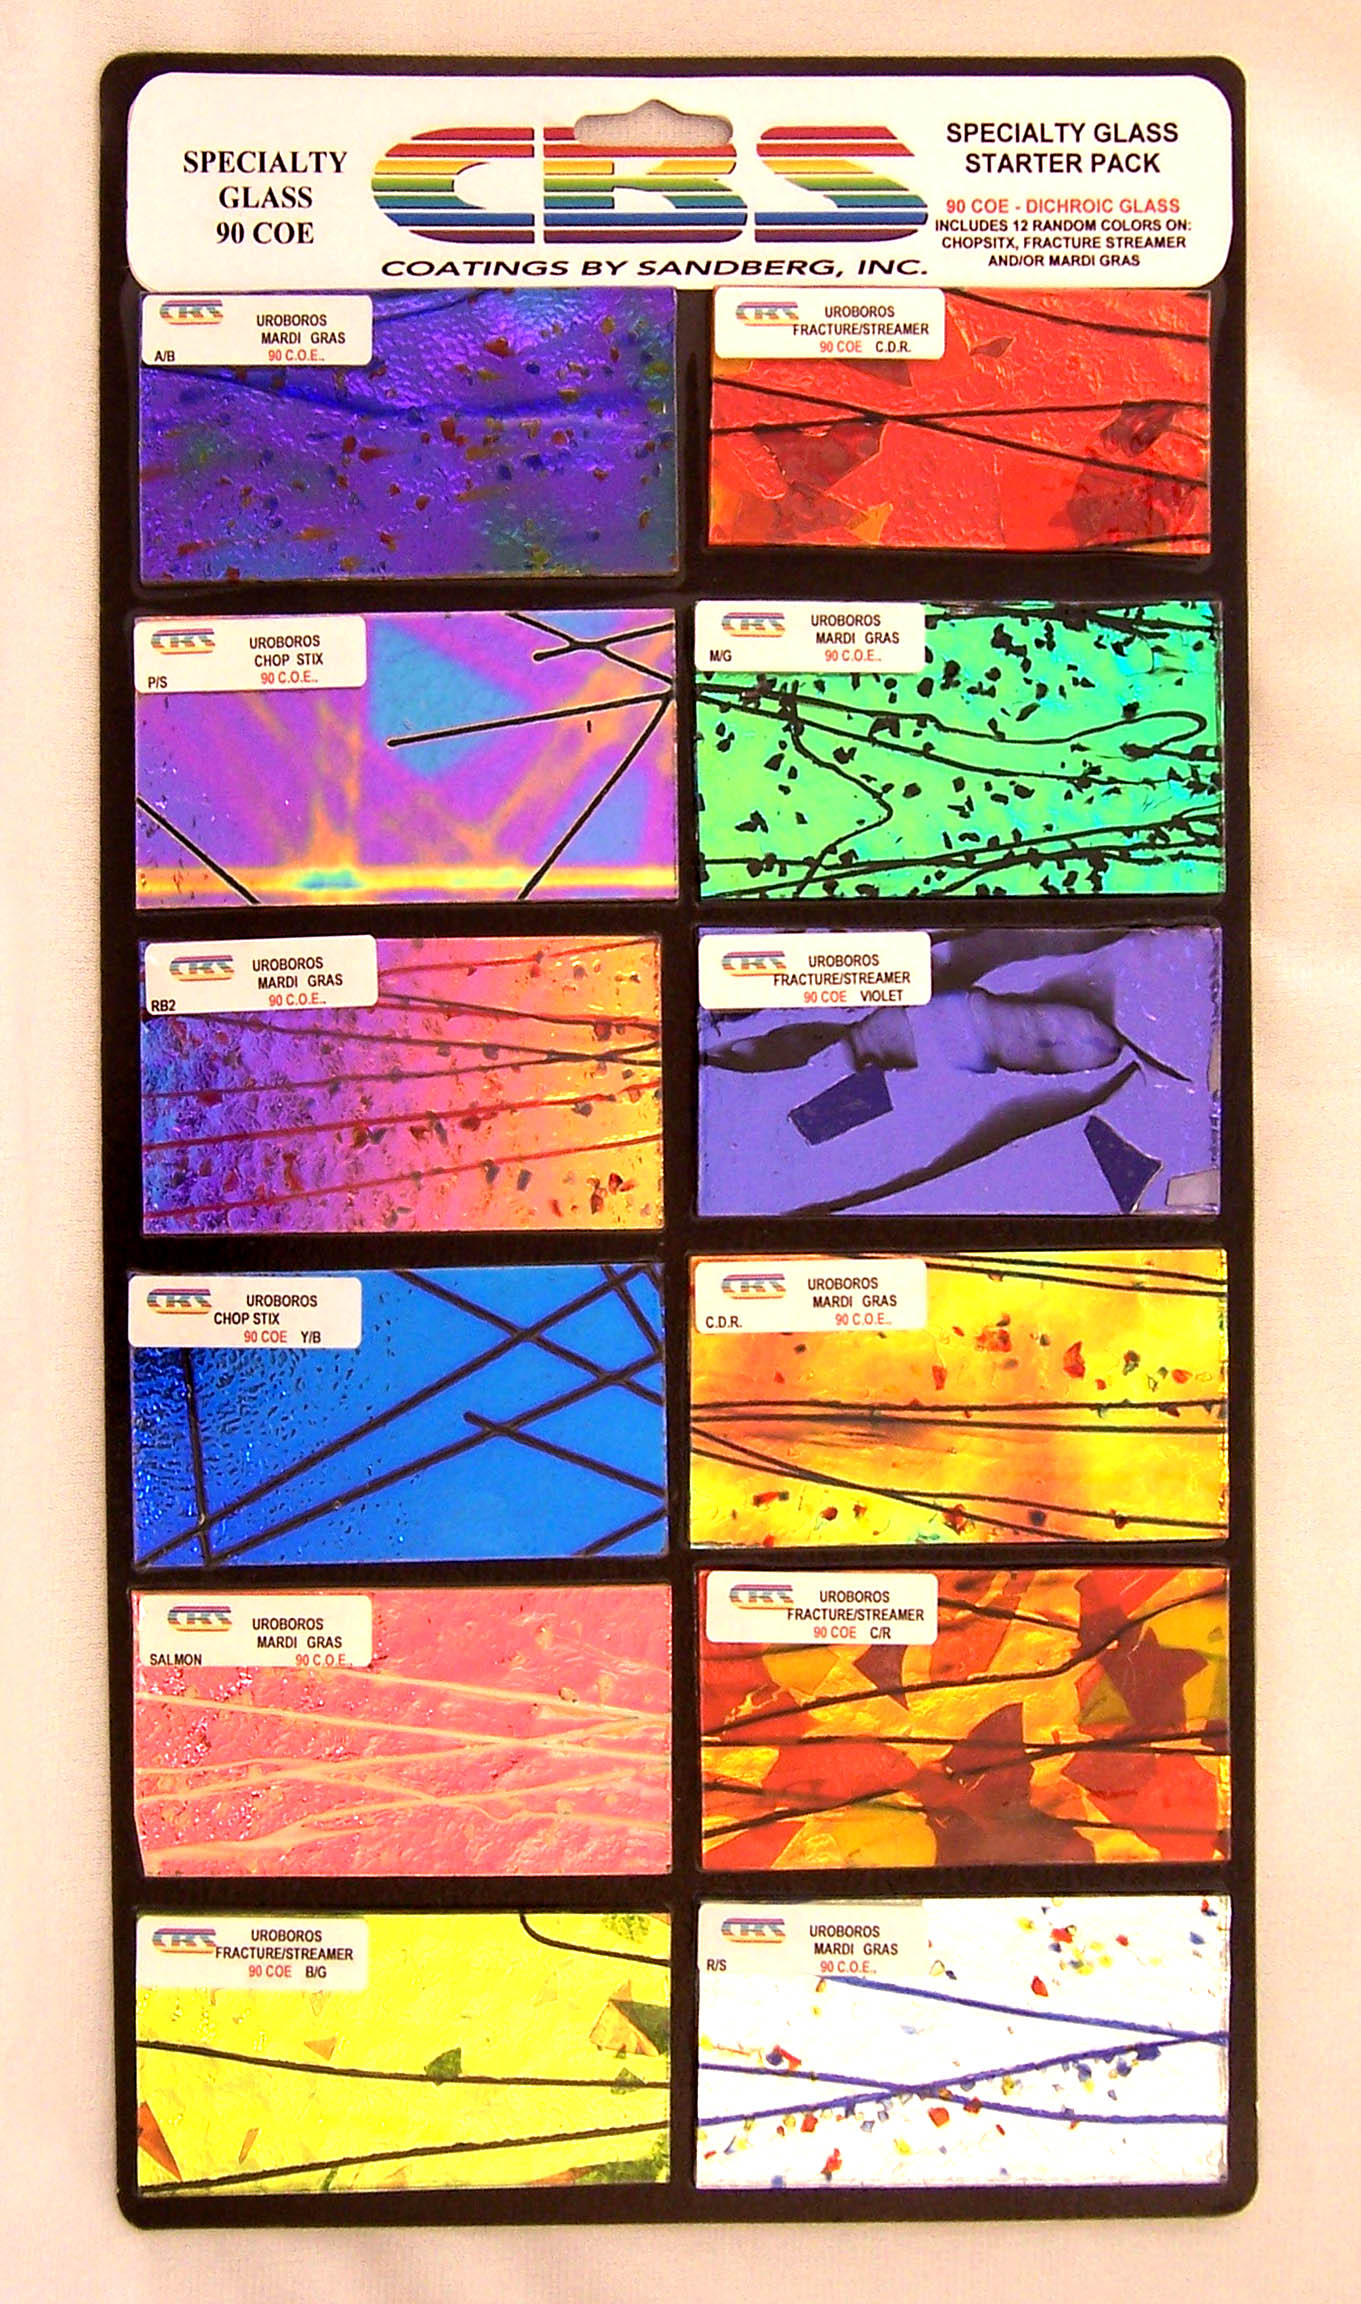 Assorted Dichroic on Black Glass Pieces - 90 COE, Made in America, 2 OZ.